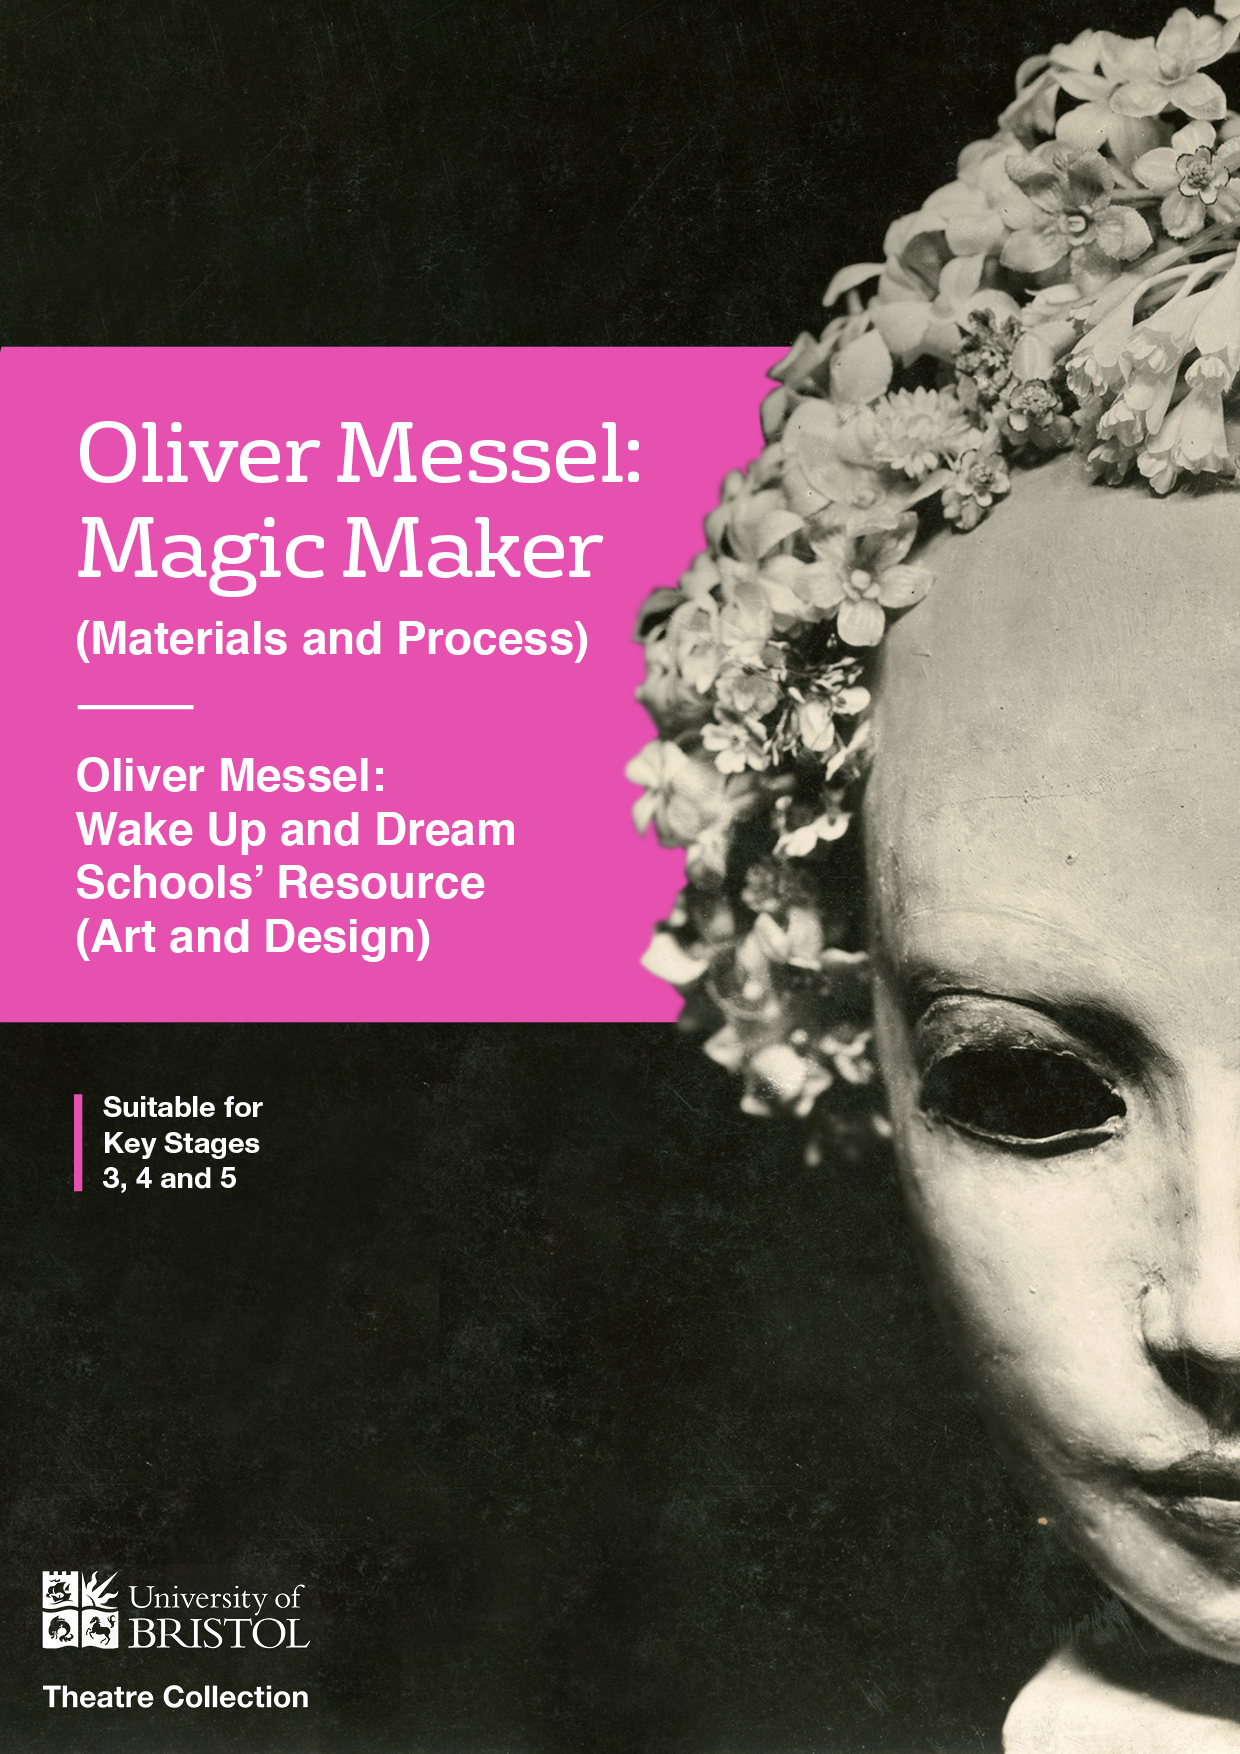 Oliver Messel: Magic maker (materials and process). Oliver Messel: Wake up and dream schools' resource (art and design) suitable for key stages 3, 4 and 5. University of Bristol Theatre Collection.